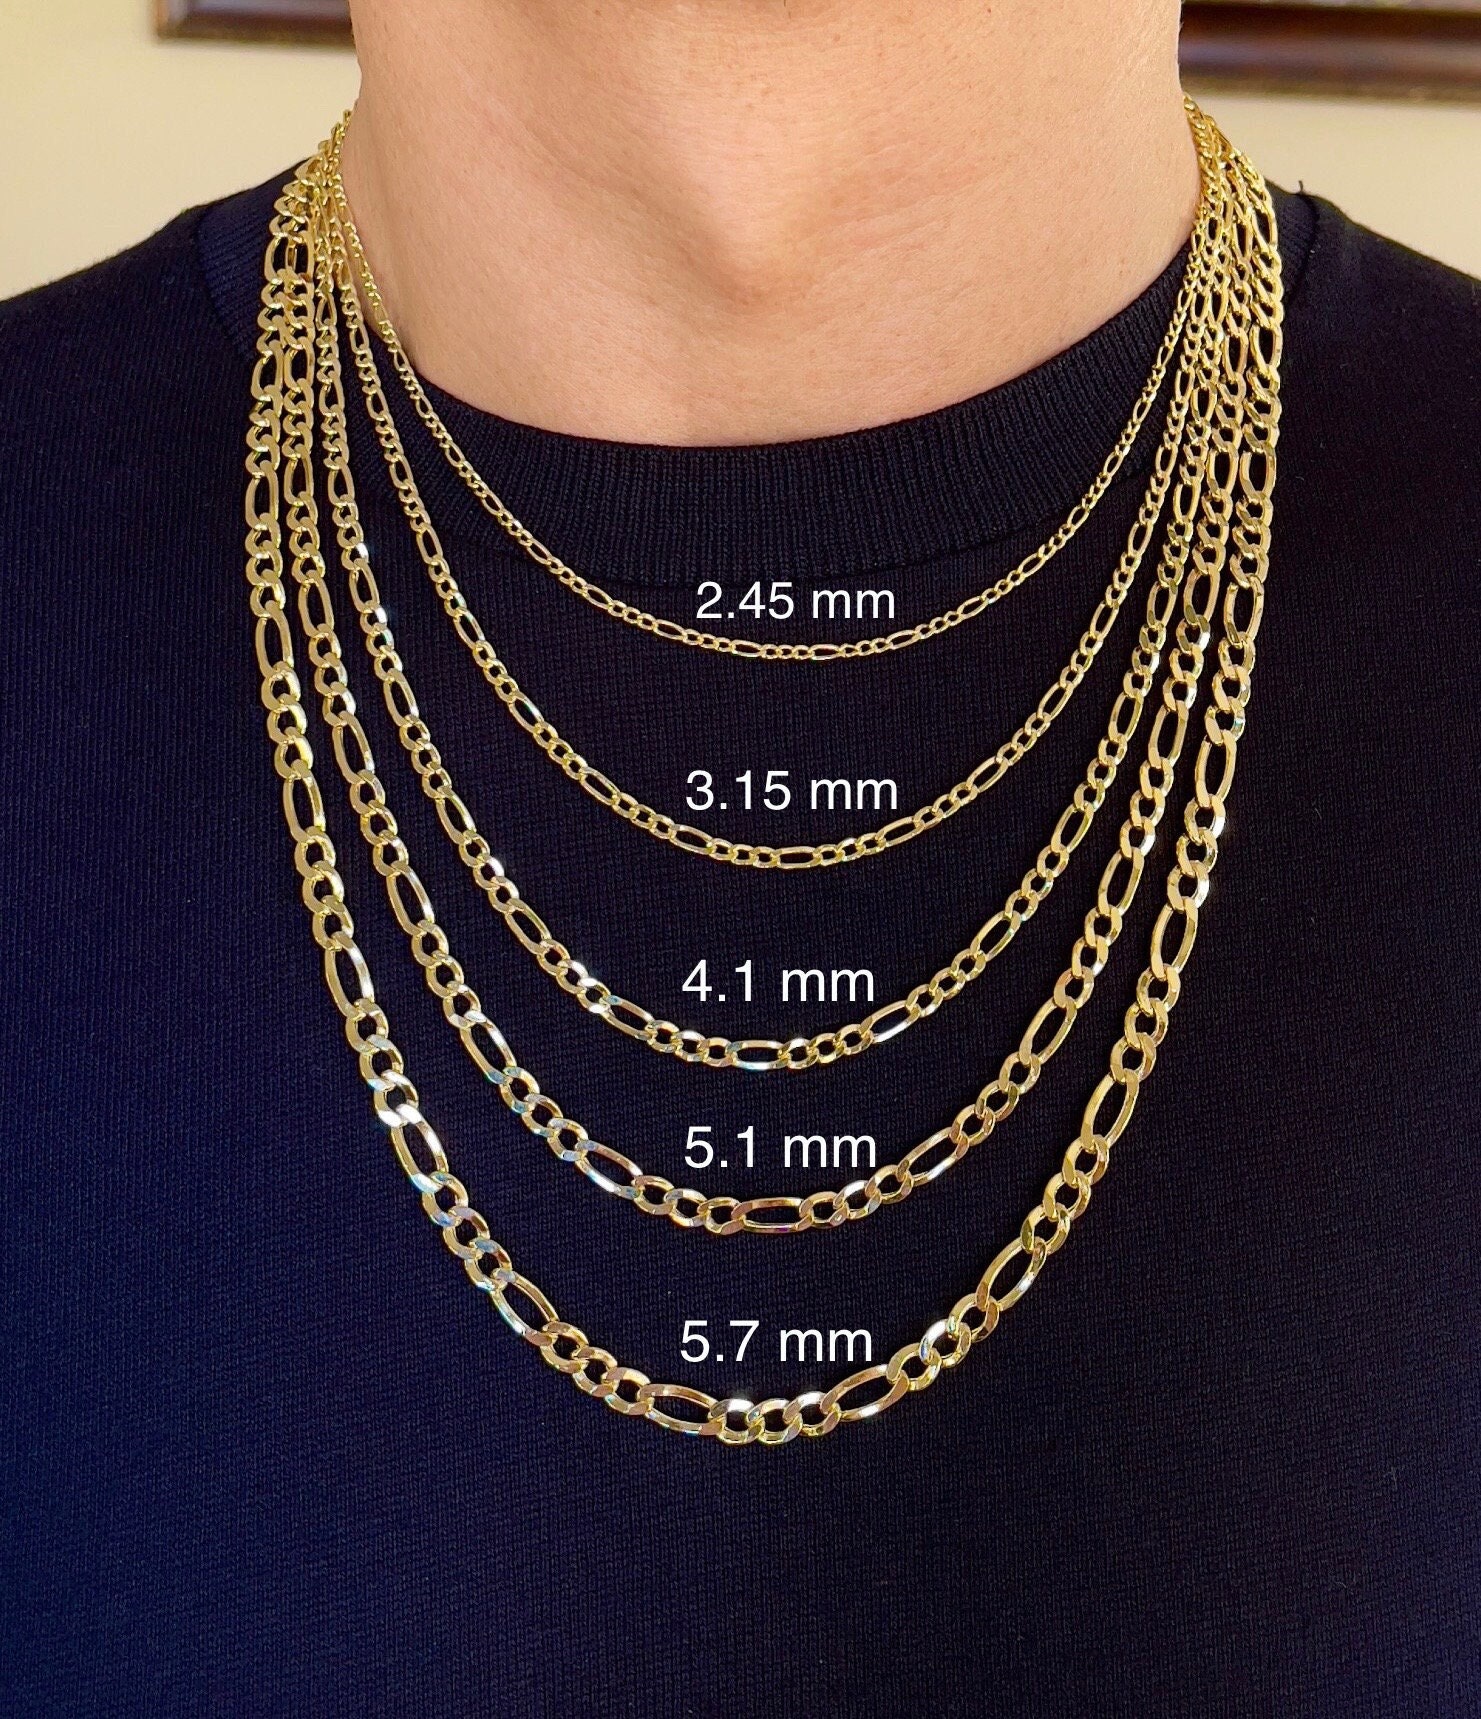 Paperclip Chain Necklace in 14K Yellow Gold, 3.15mm, 18